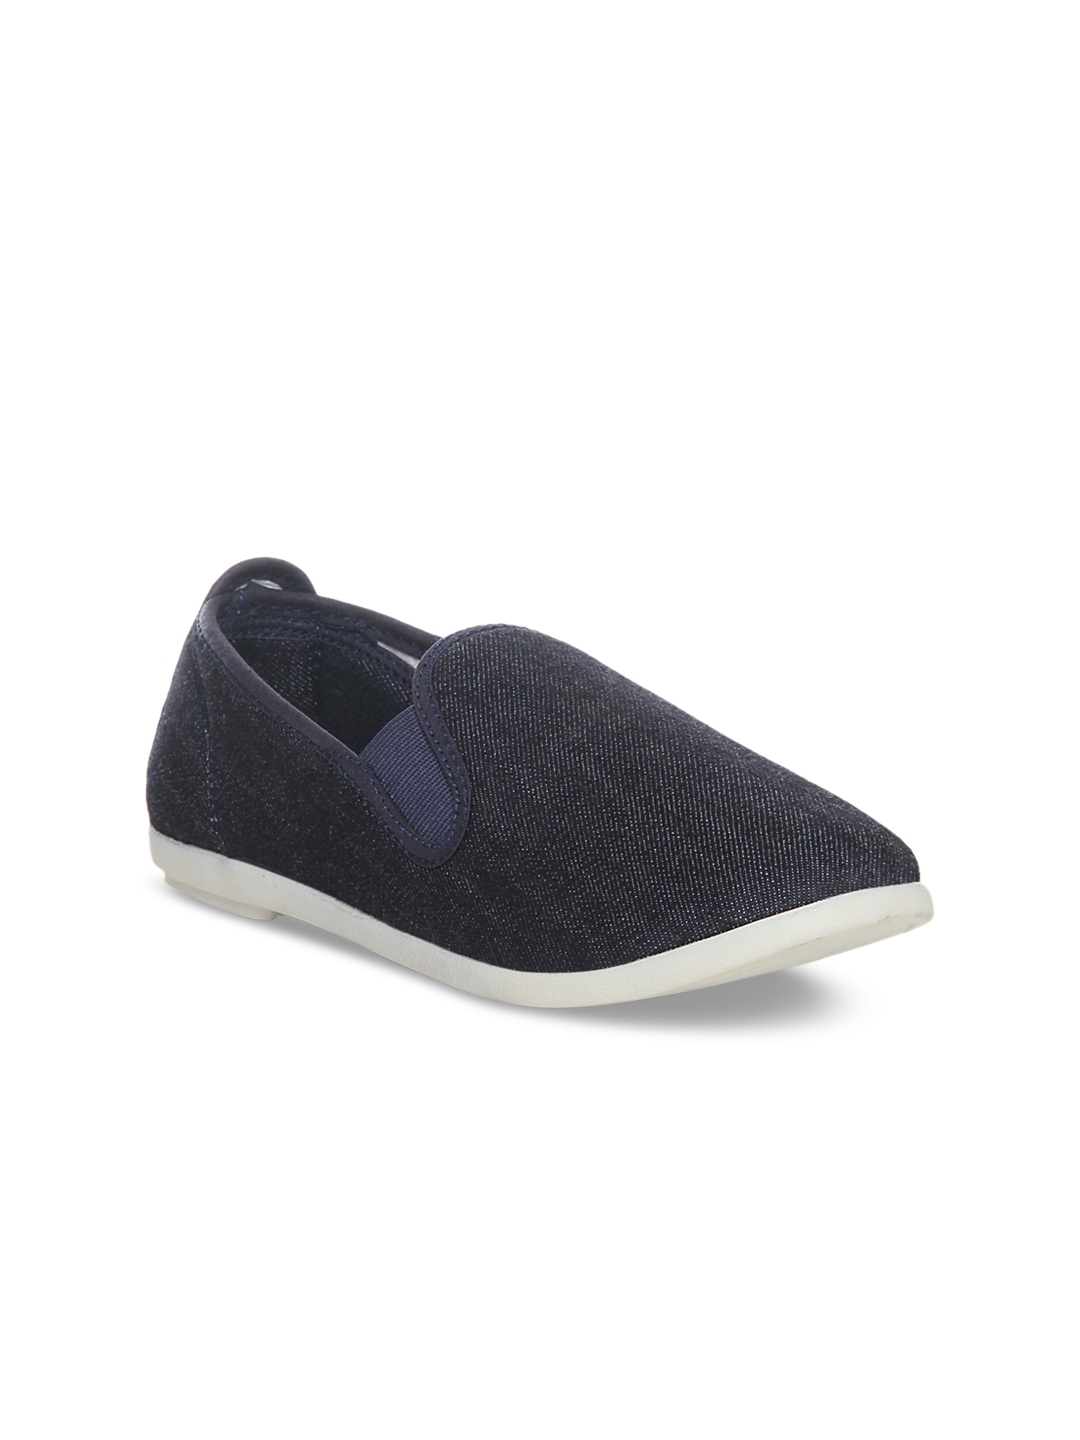 Buy SCENTRA Women Navy Blue Slip On Sneakers - Casual Shoes for Women ...